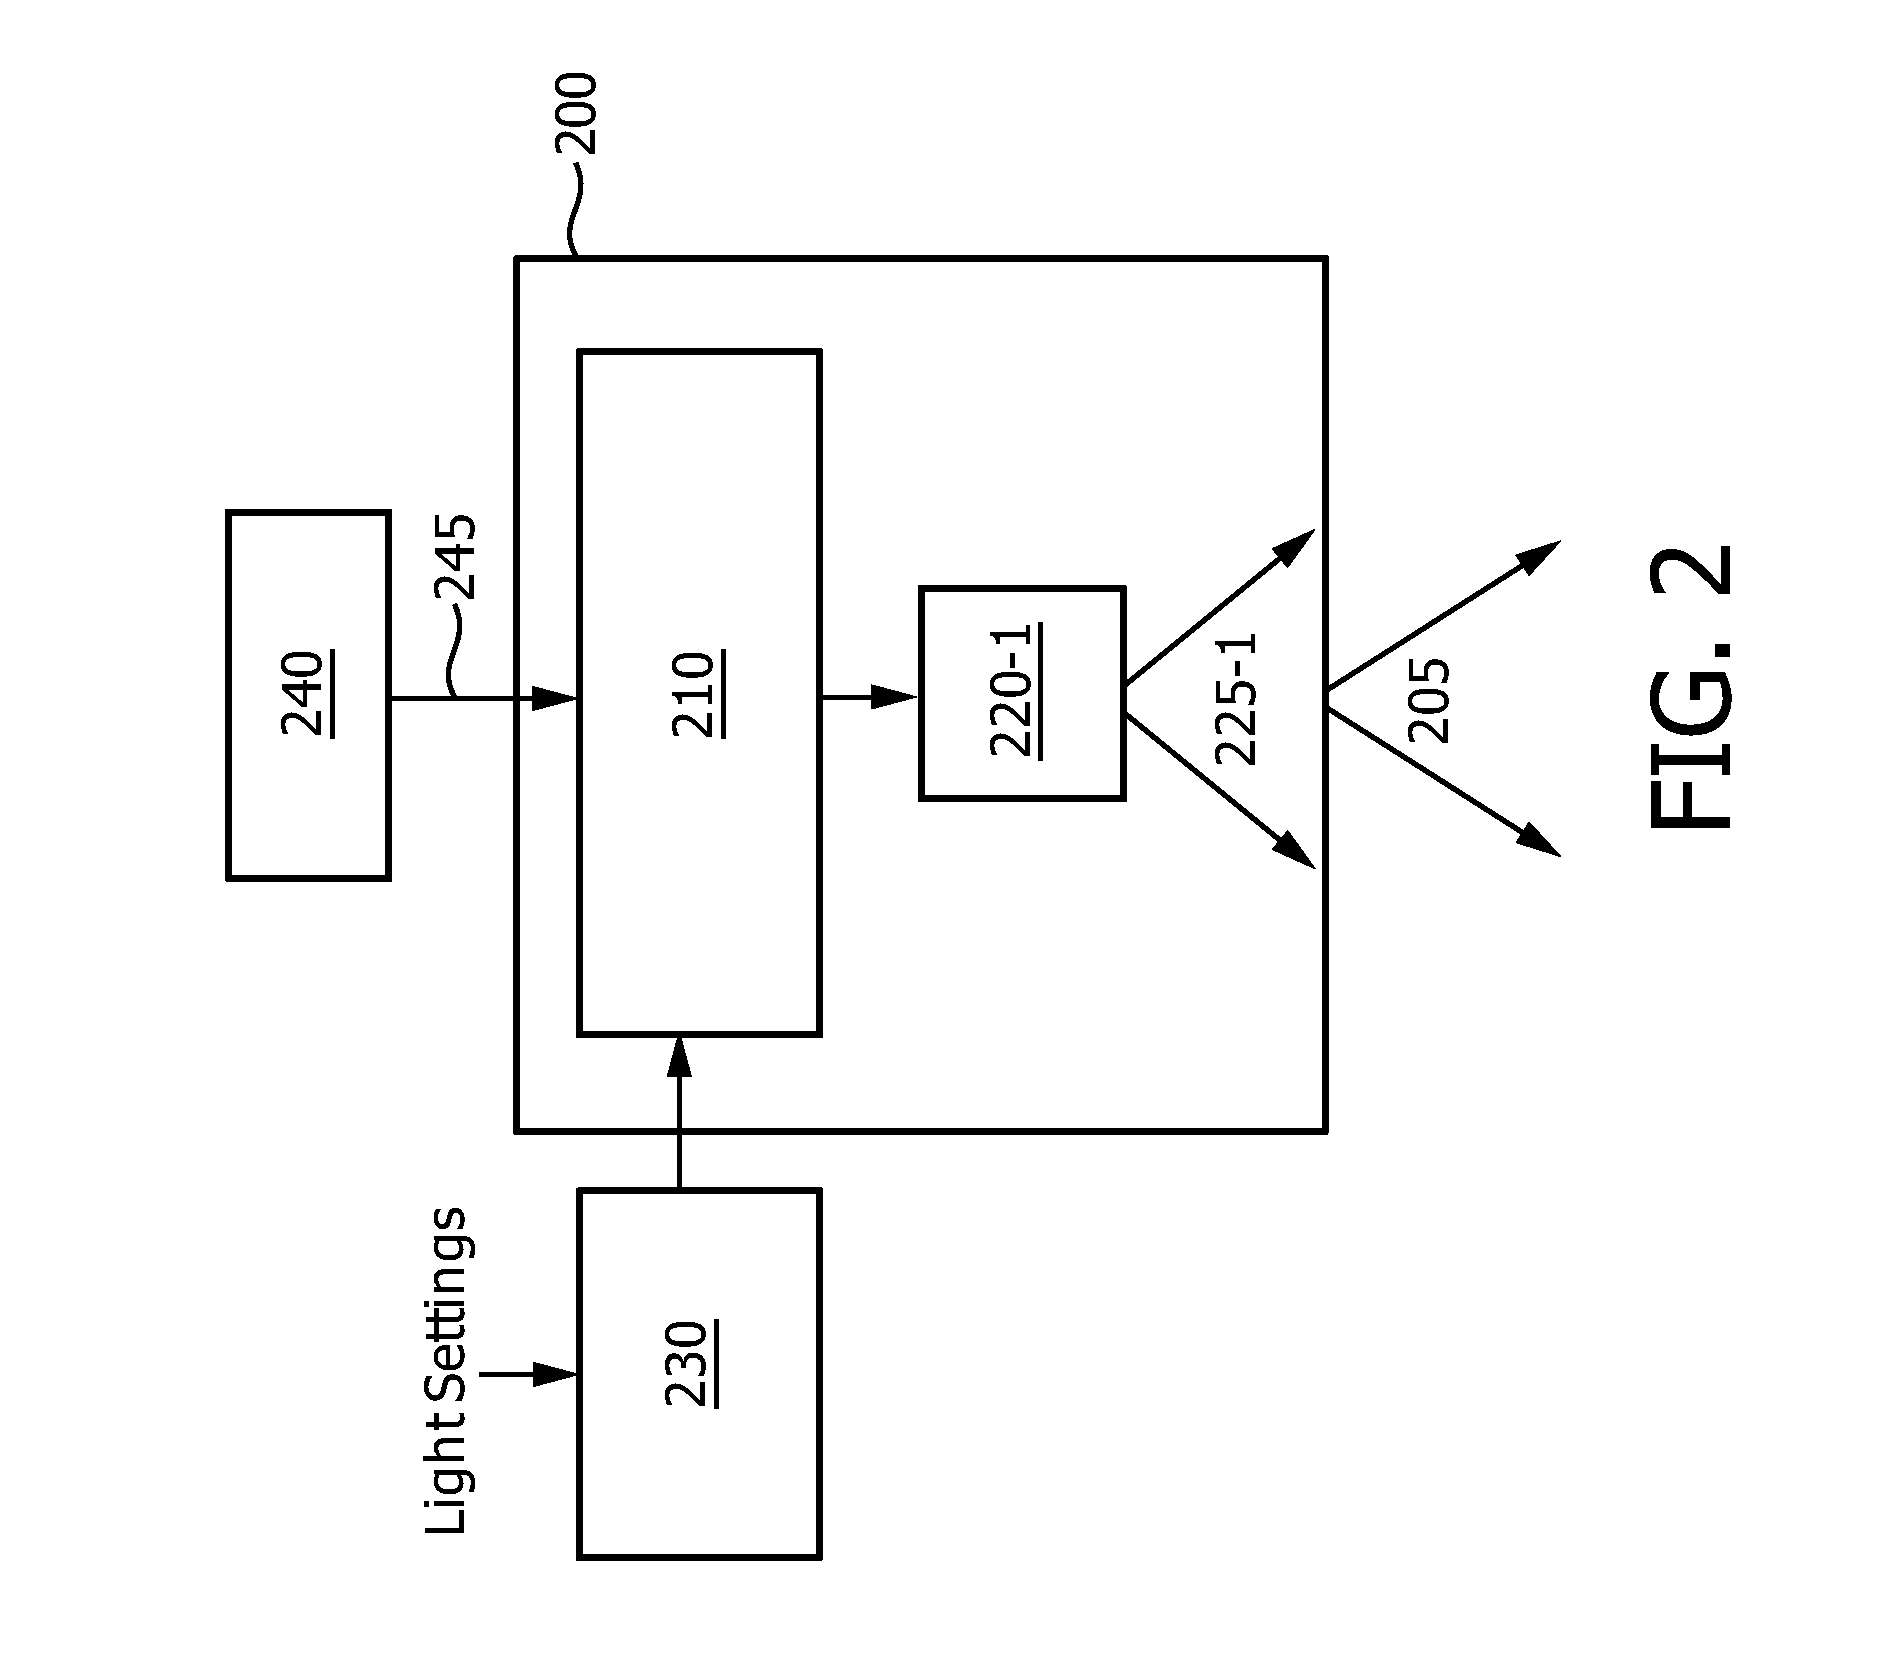 Data Detection For Visible Light Communications Using Conventional Camera Sensor